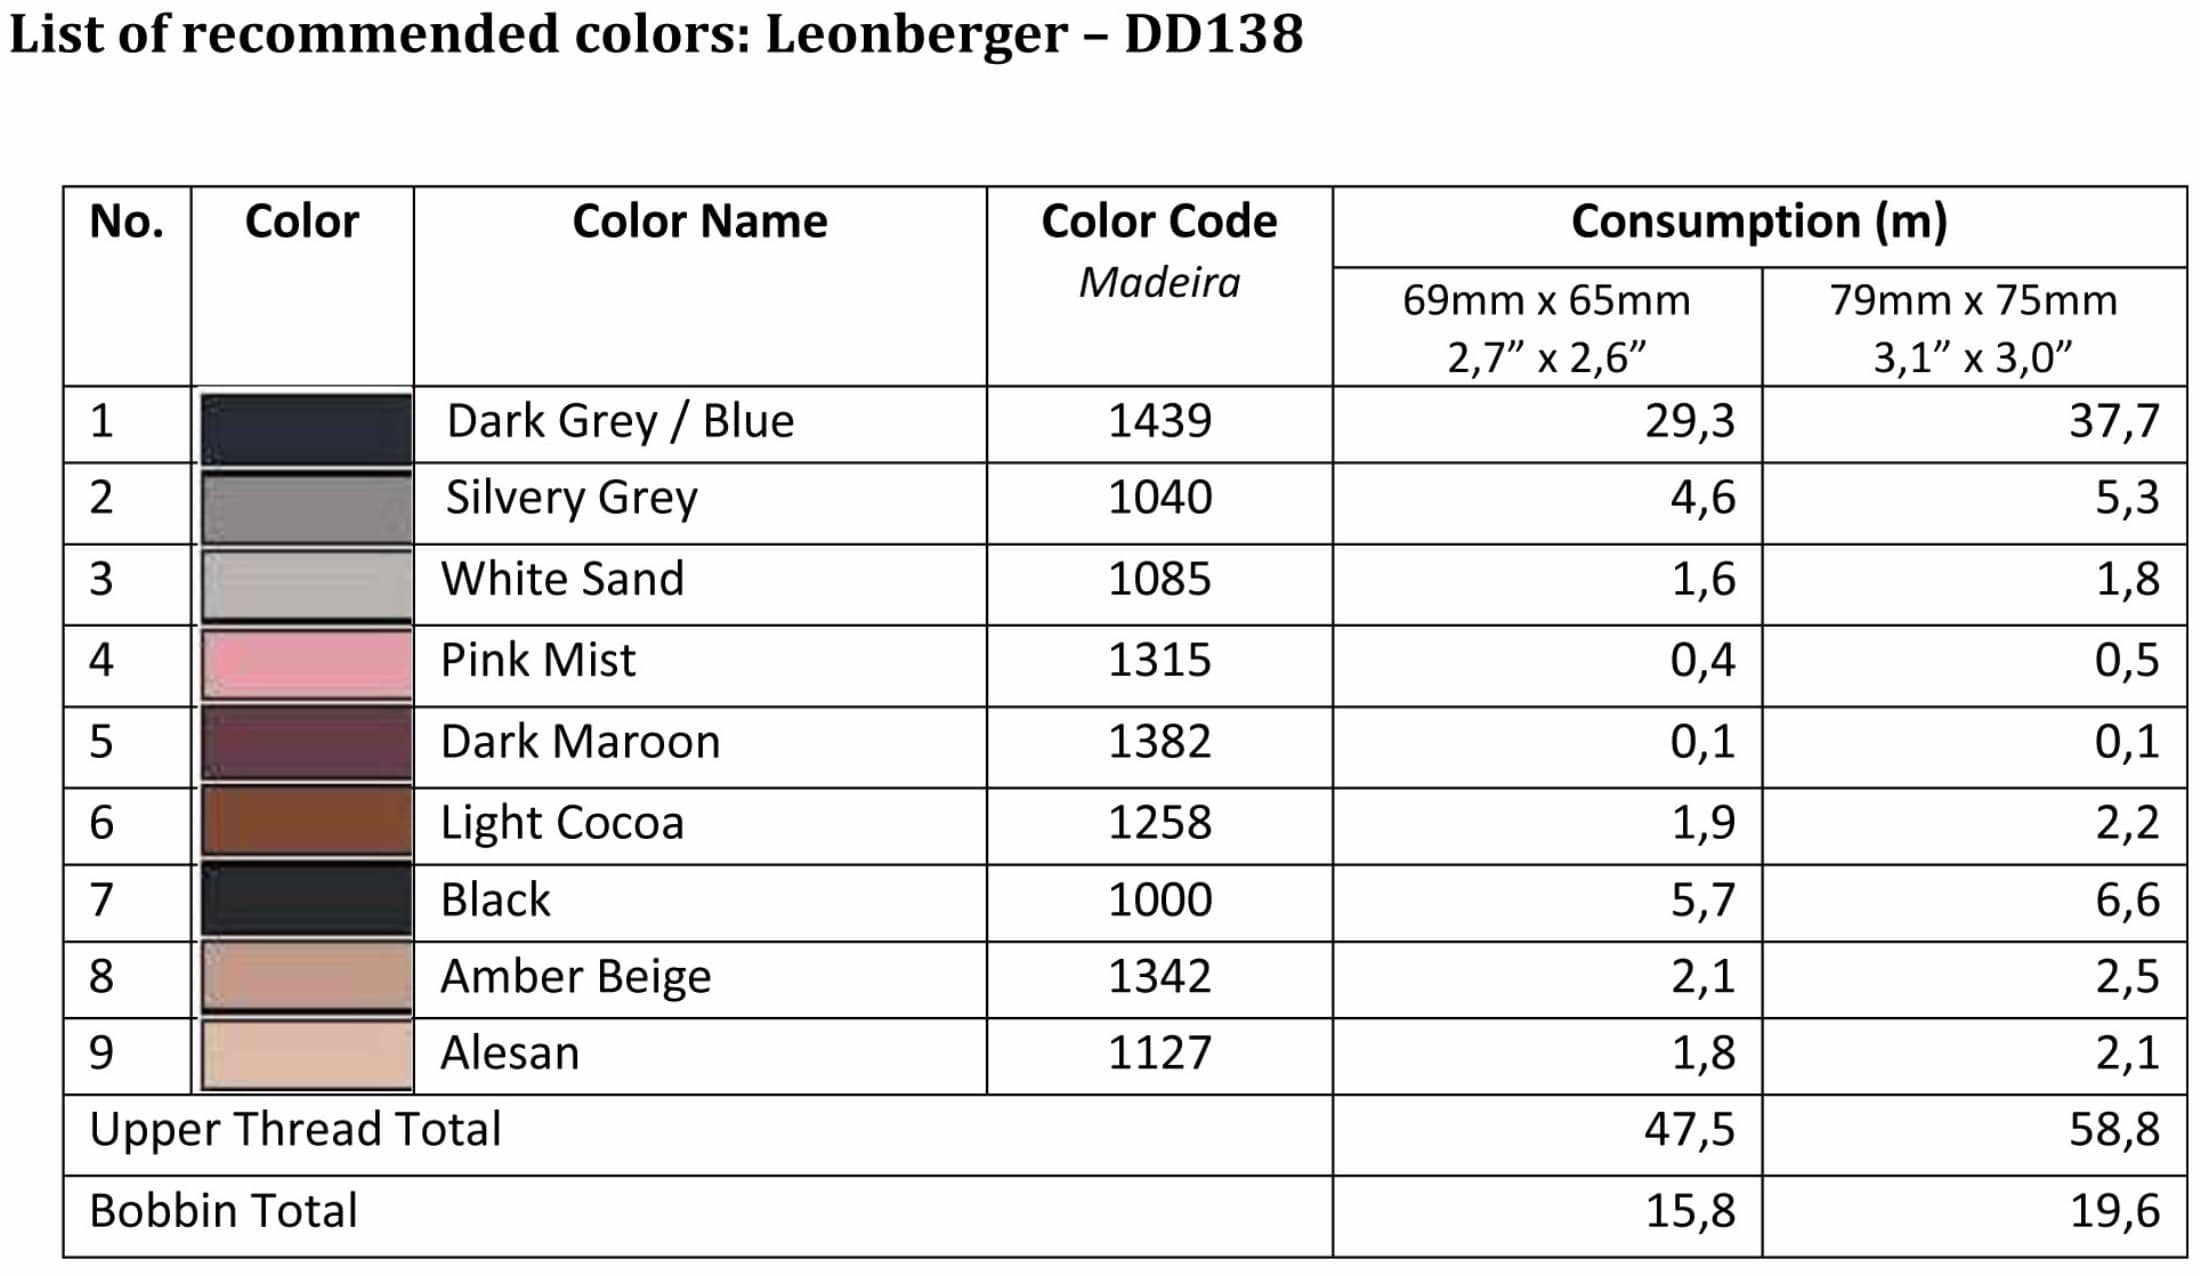 List of recommended colors - DD138